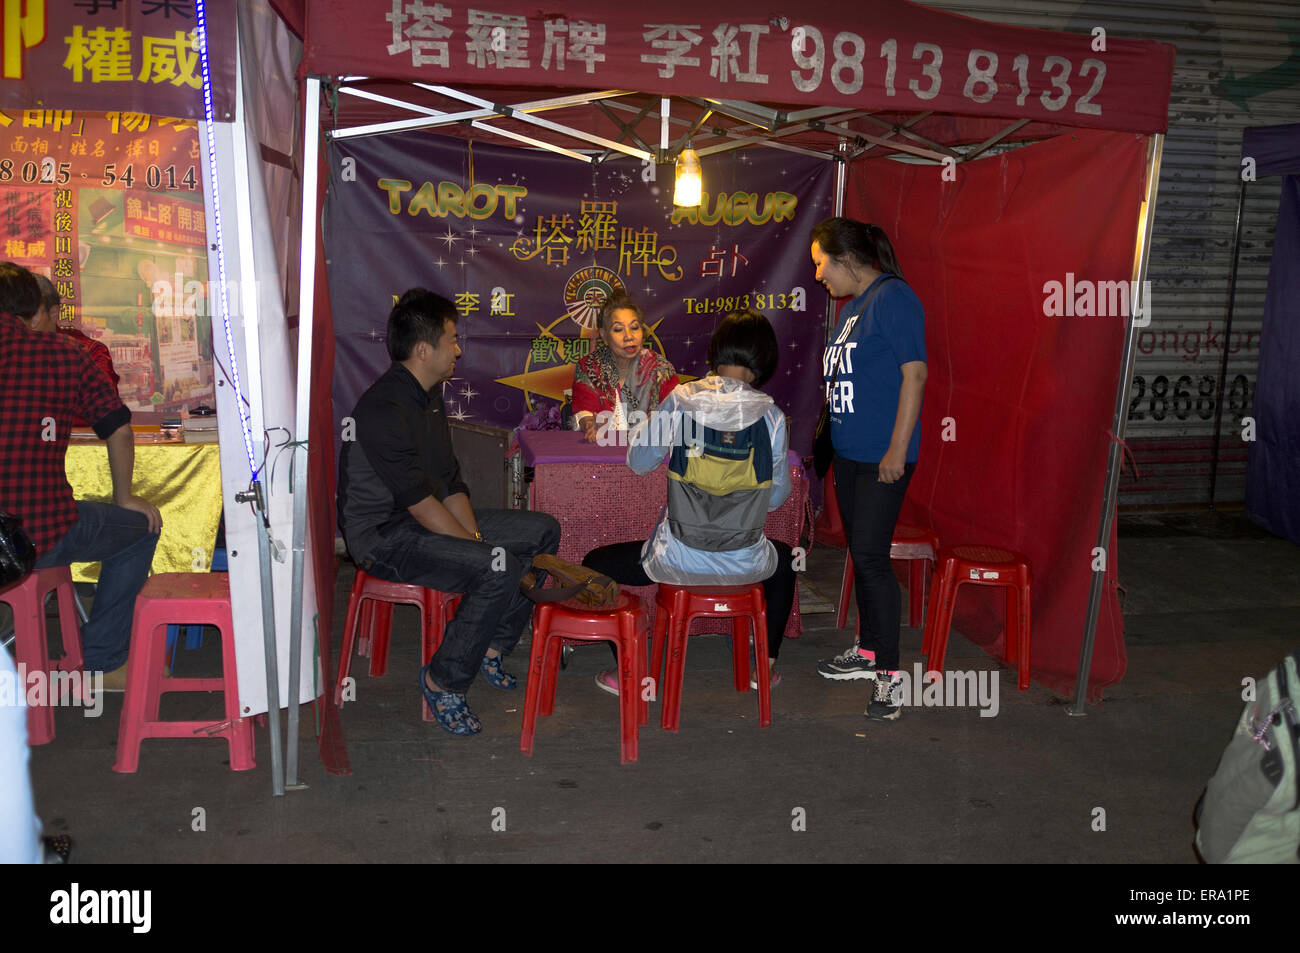 dh Temple street market YAU MA TEI HONG KONG Family with fortune teller stall chinese woman telling Stock Photo